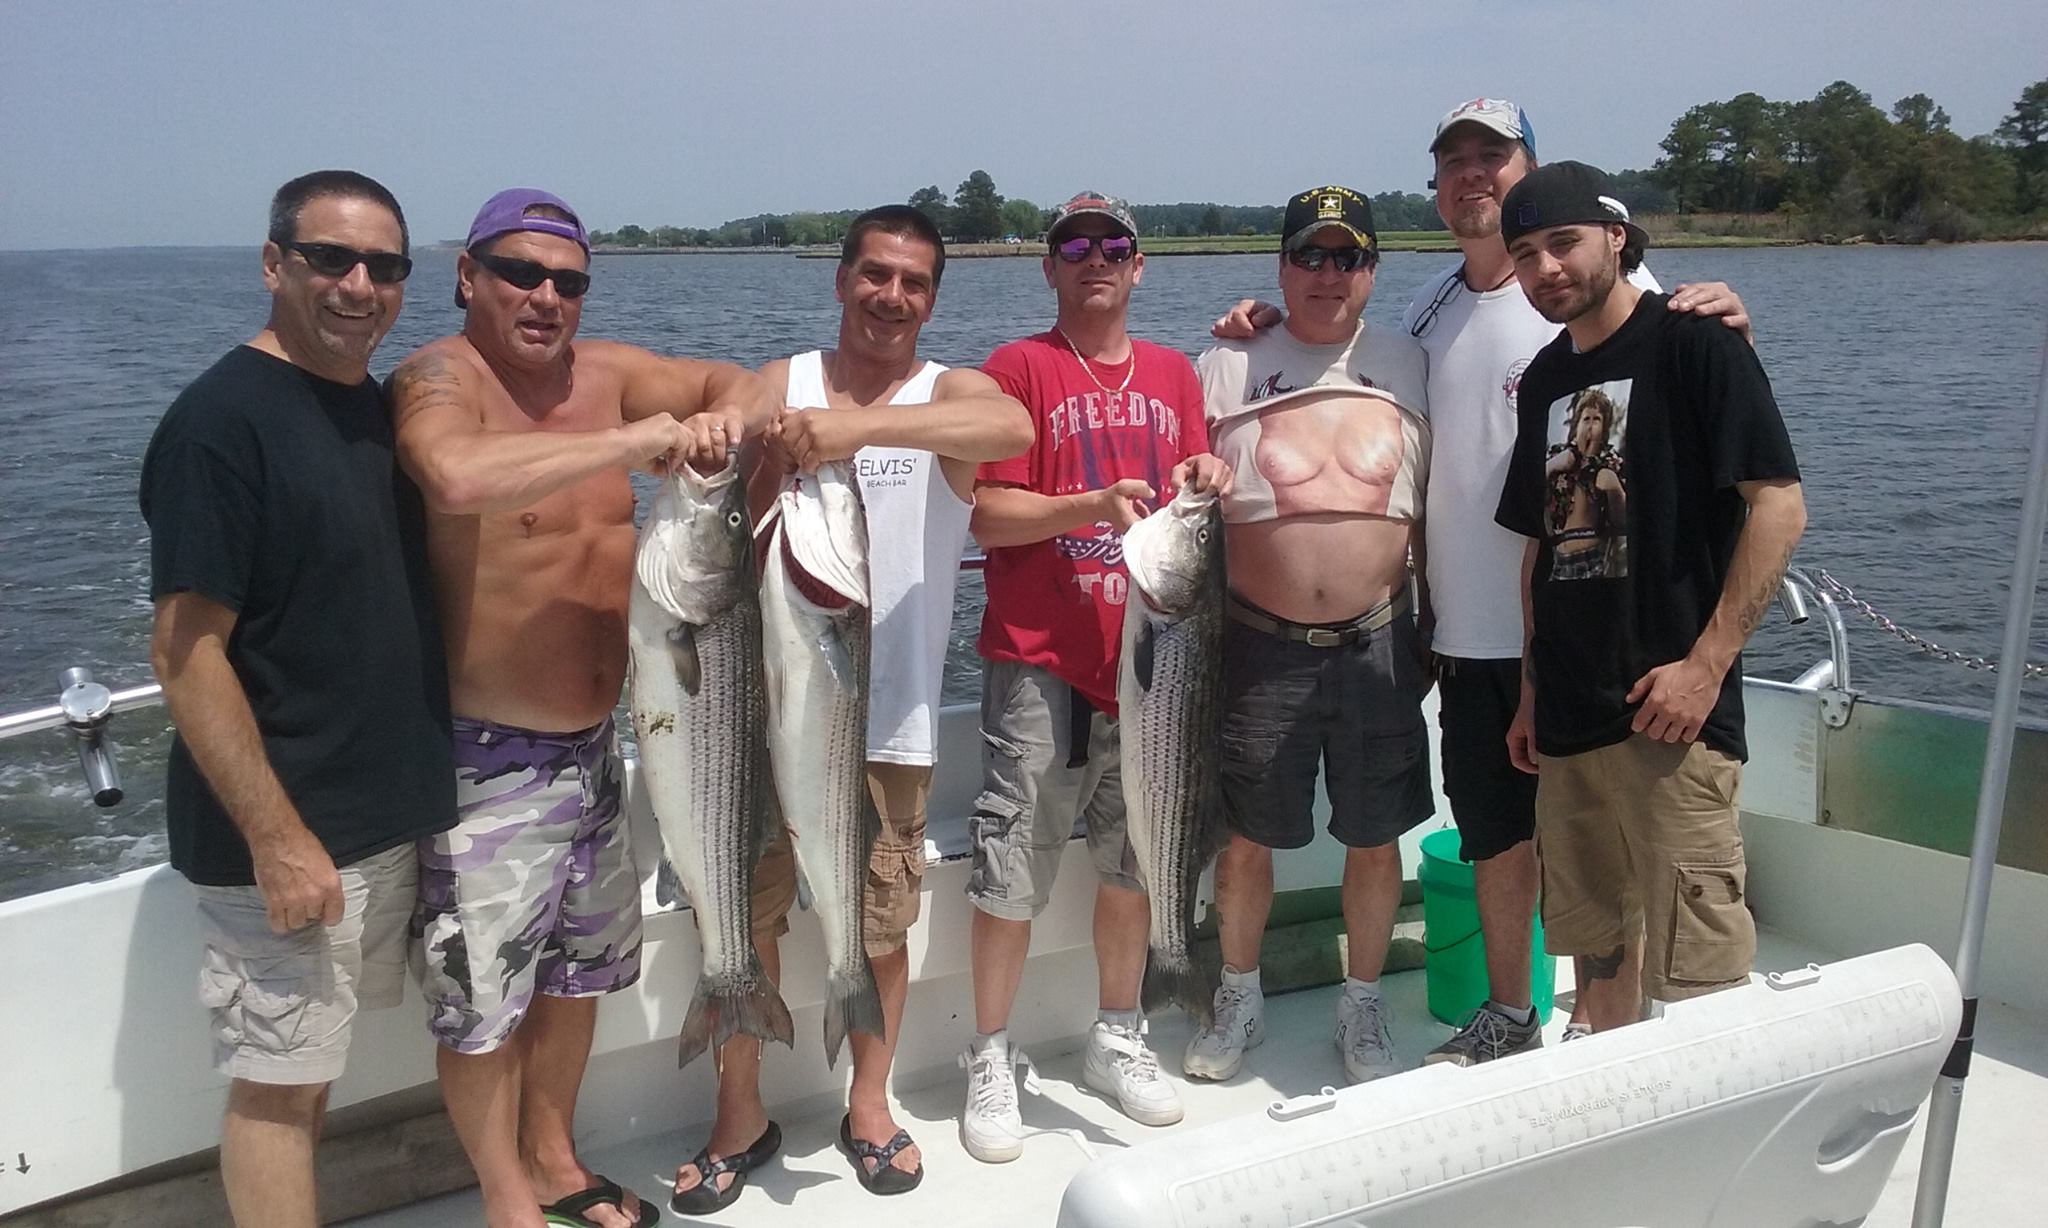 A Nice Catch Of Rockfish On The Day!